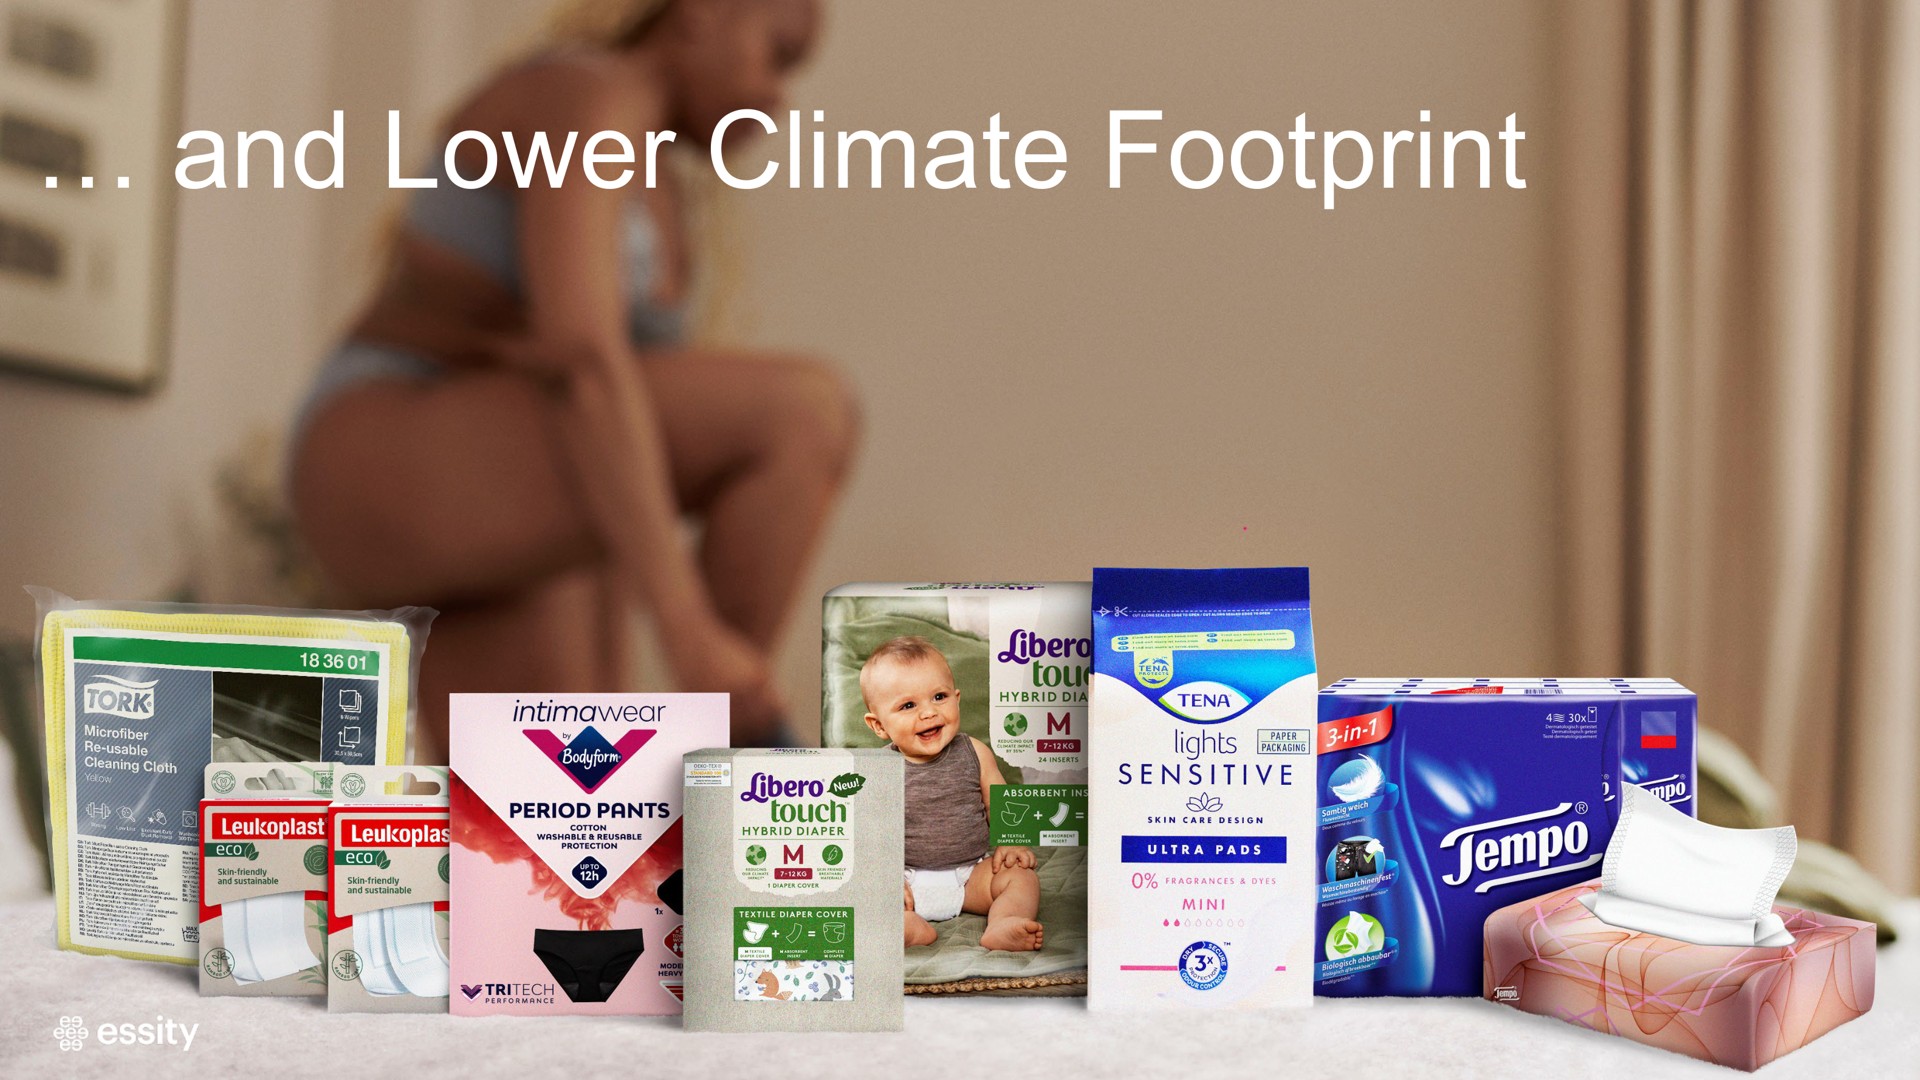 and lower climate footprint text | Essity